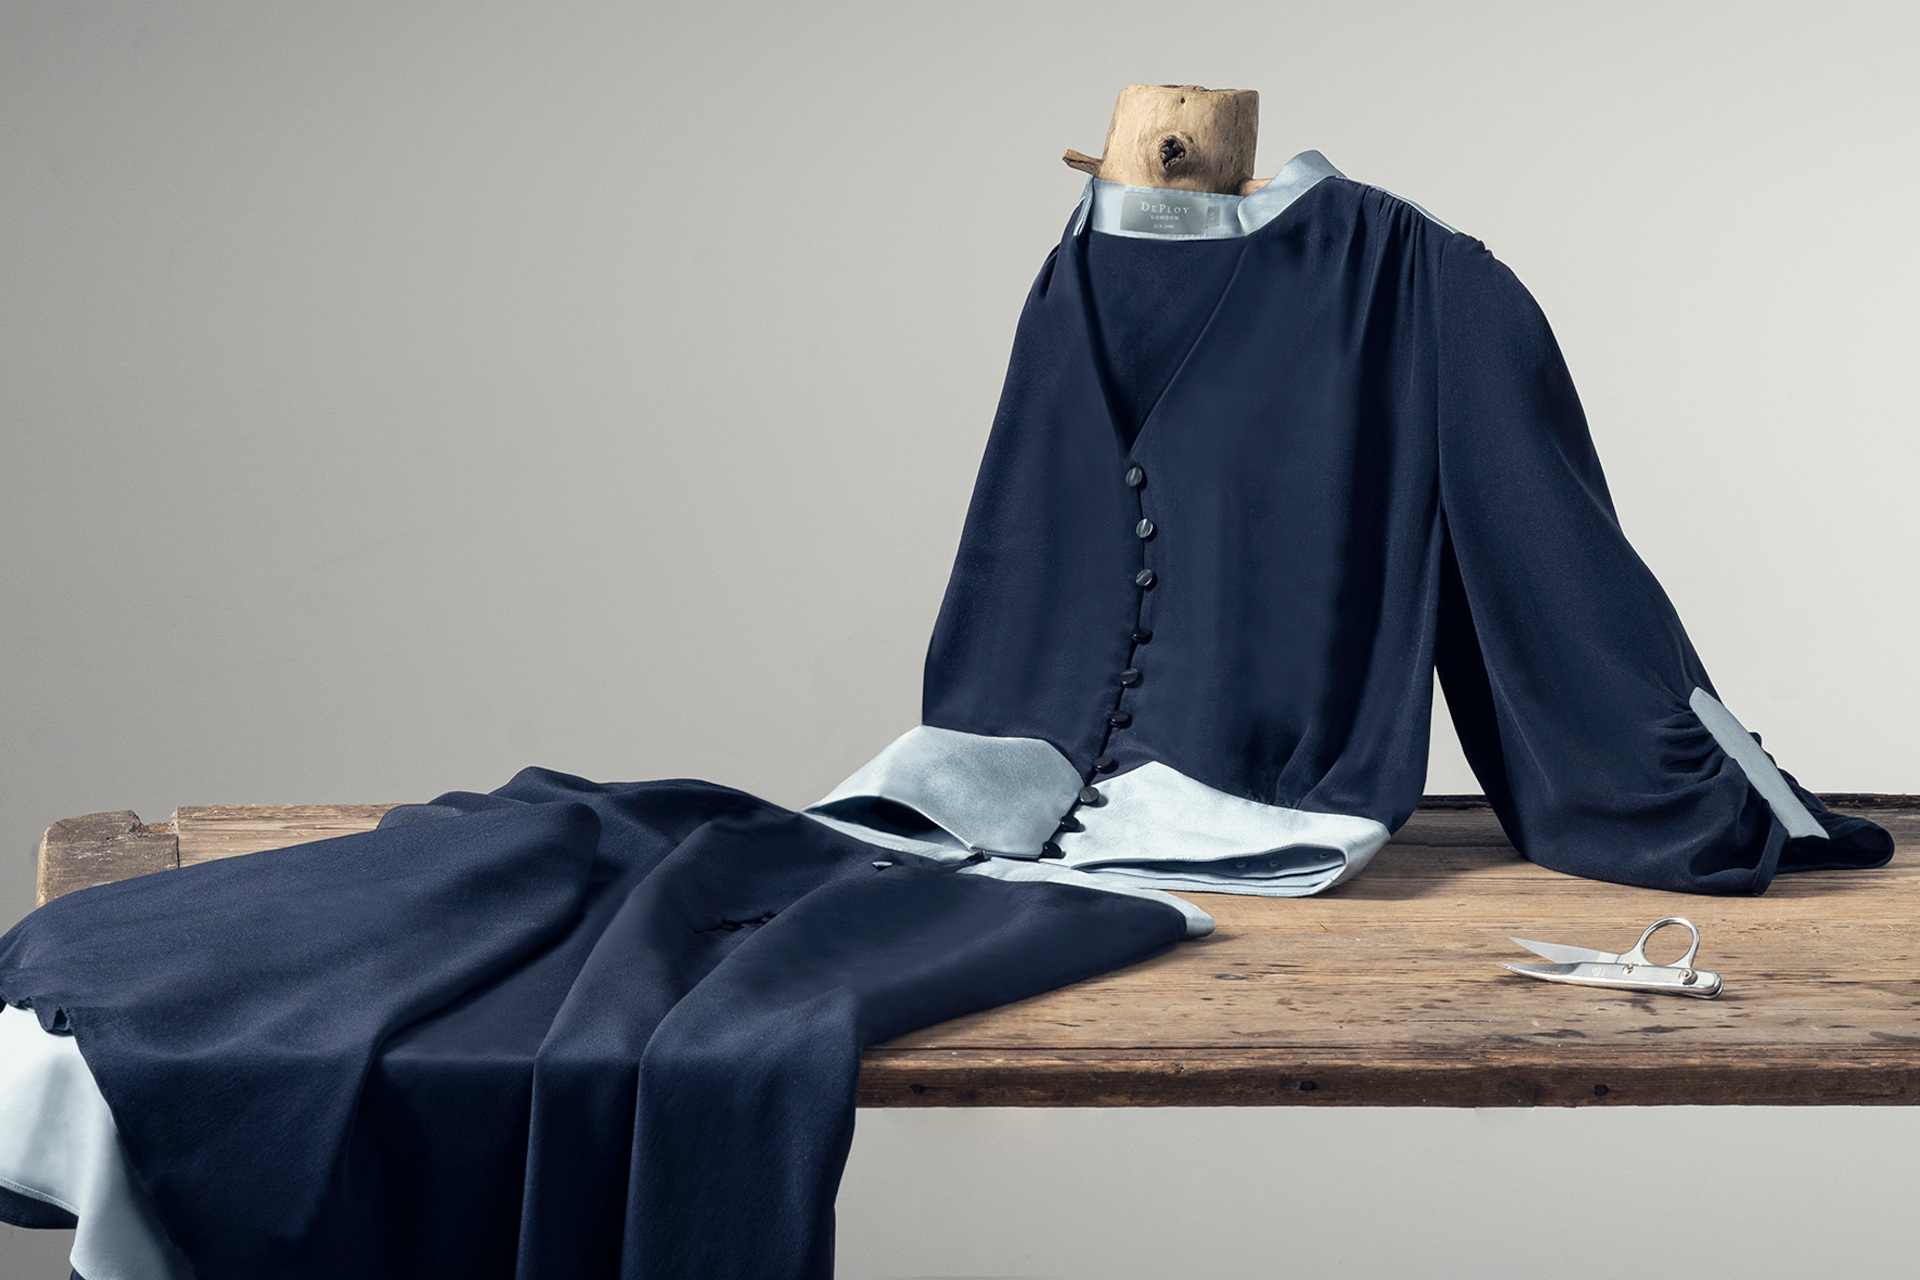 Navy clothing items draped over a wooden table, with a neutral background